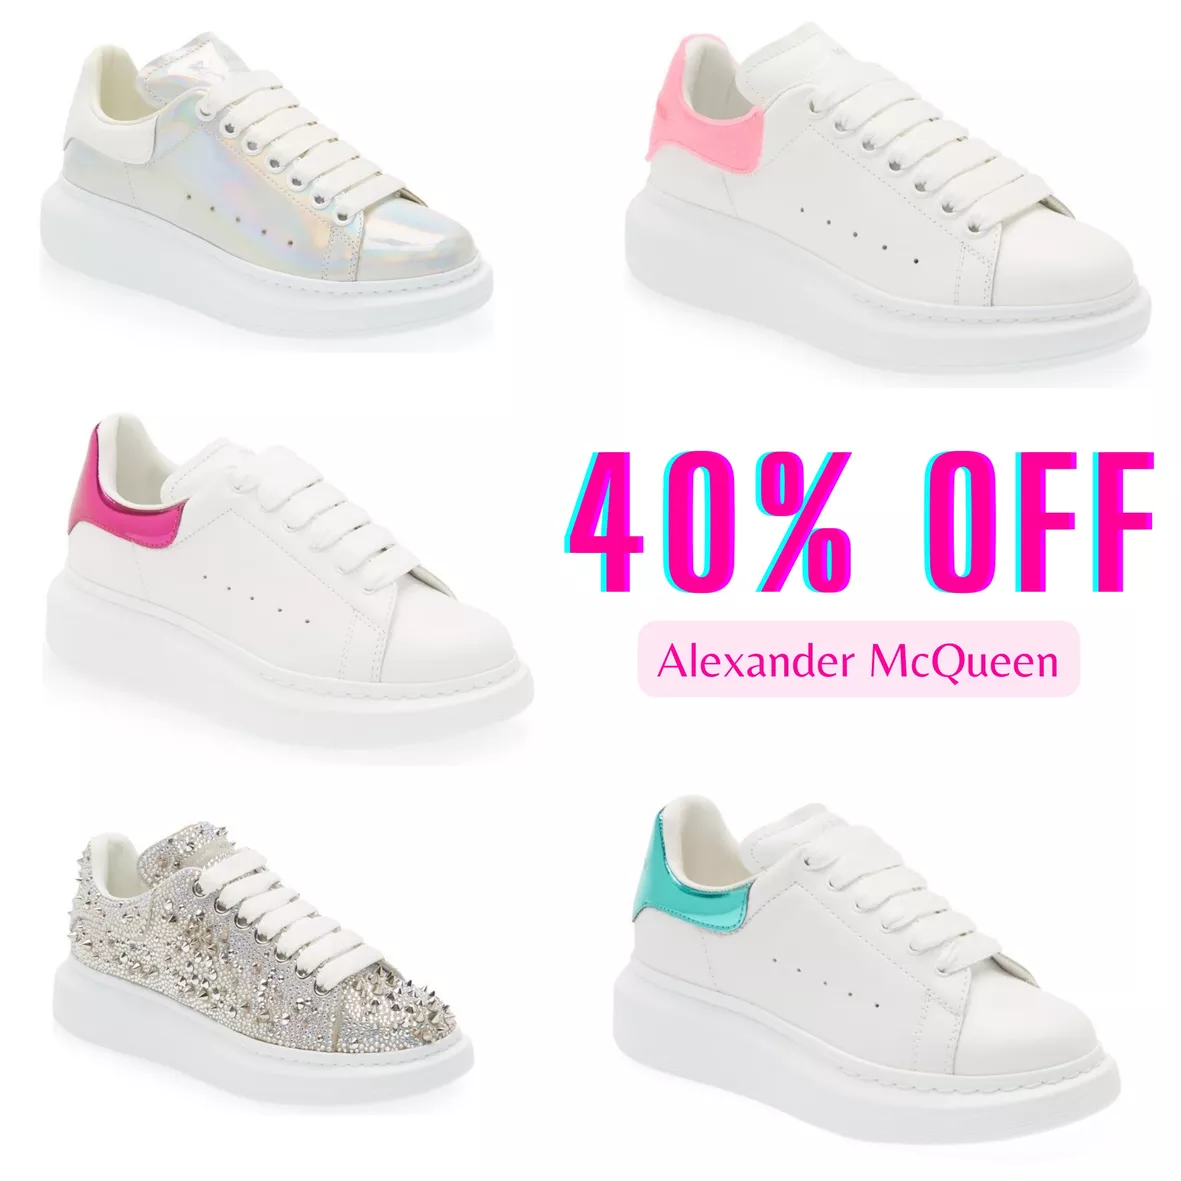 Alexander McQueen Shoes Are 40% Off at Nordstrom Right Now - The